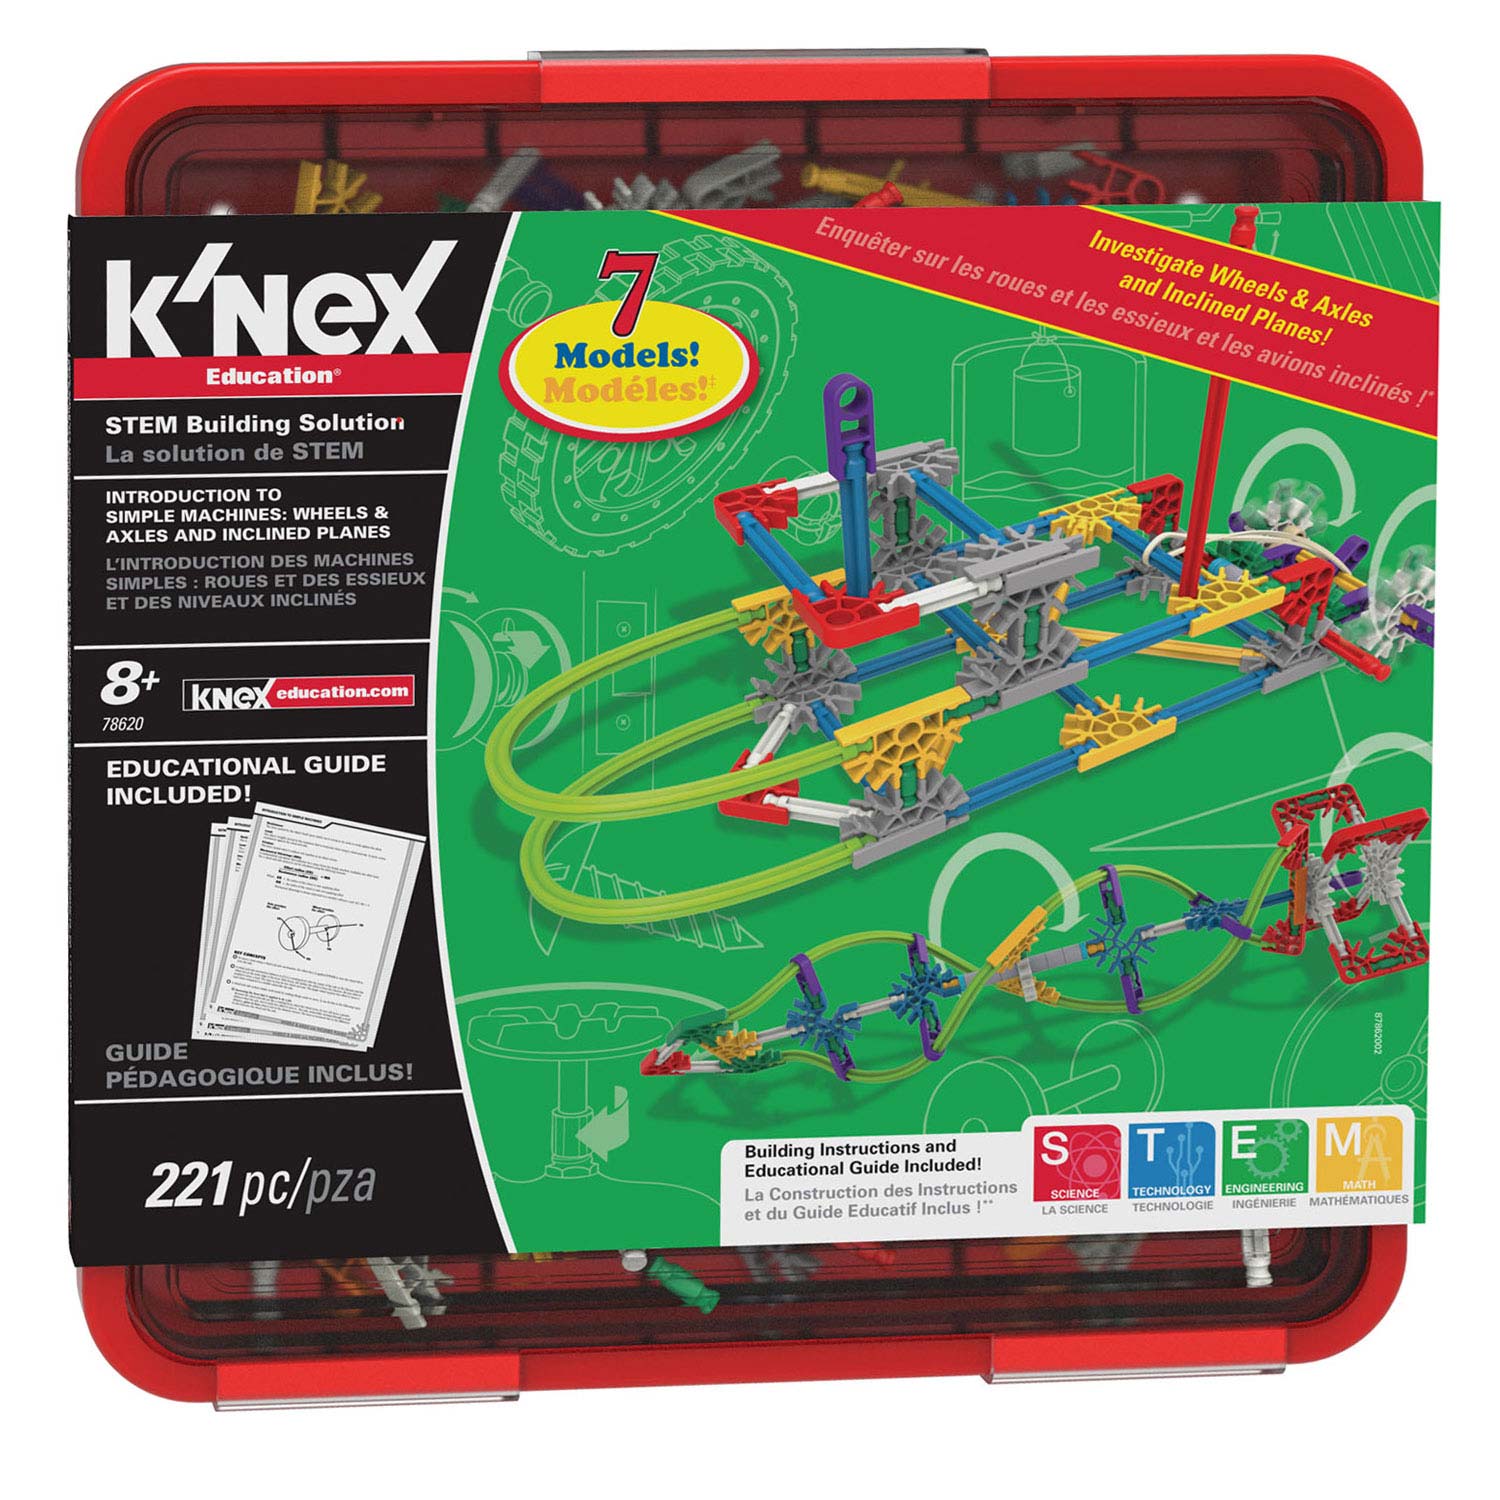 K'NEX Education Intro to Simple Machines: Wheels, Axles & Inclined Planes - Bouwset